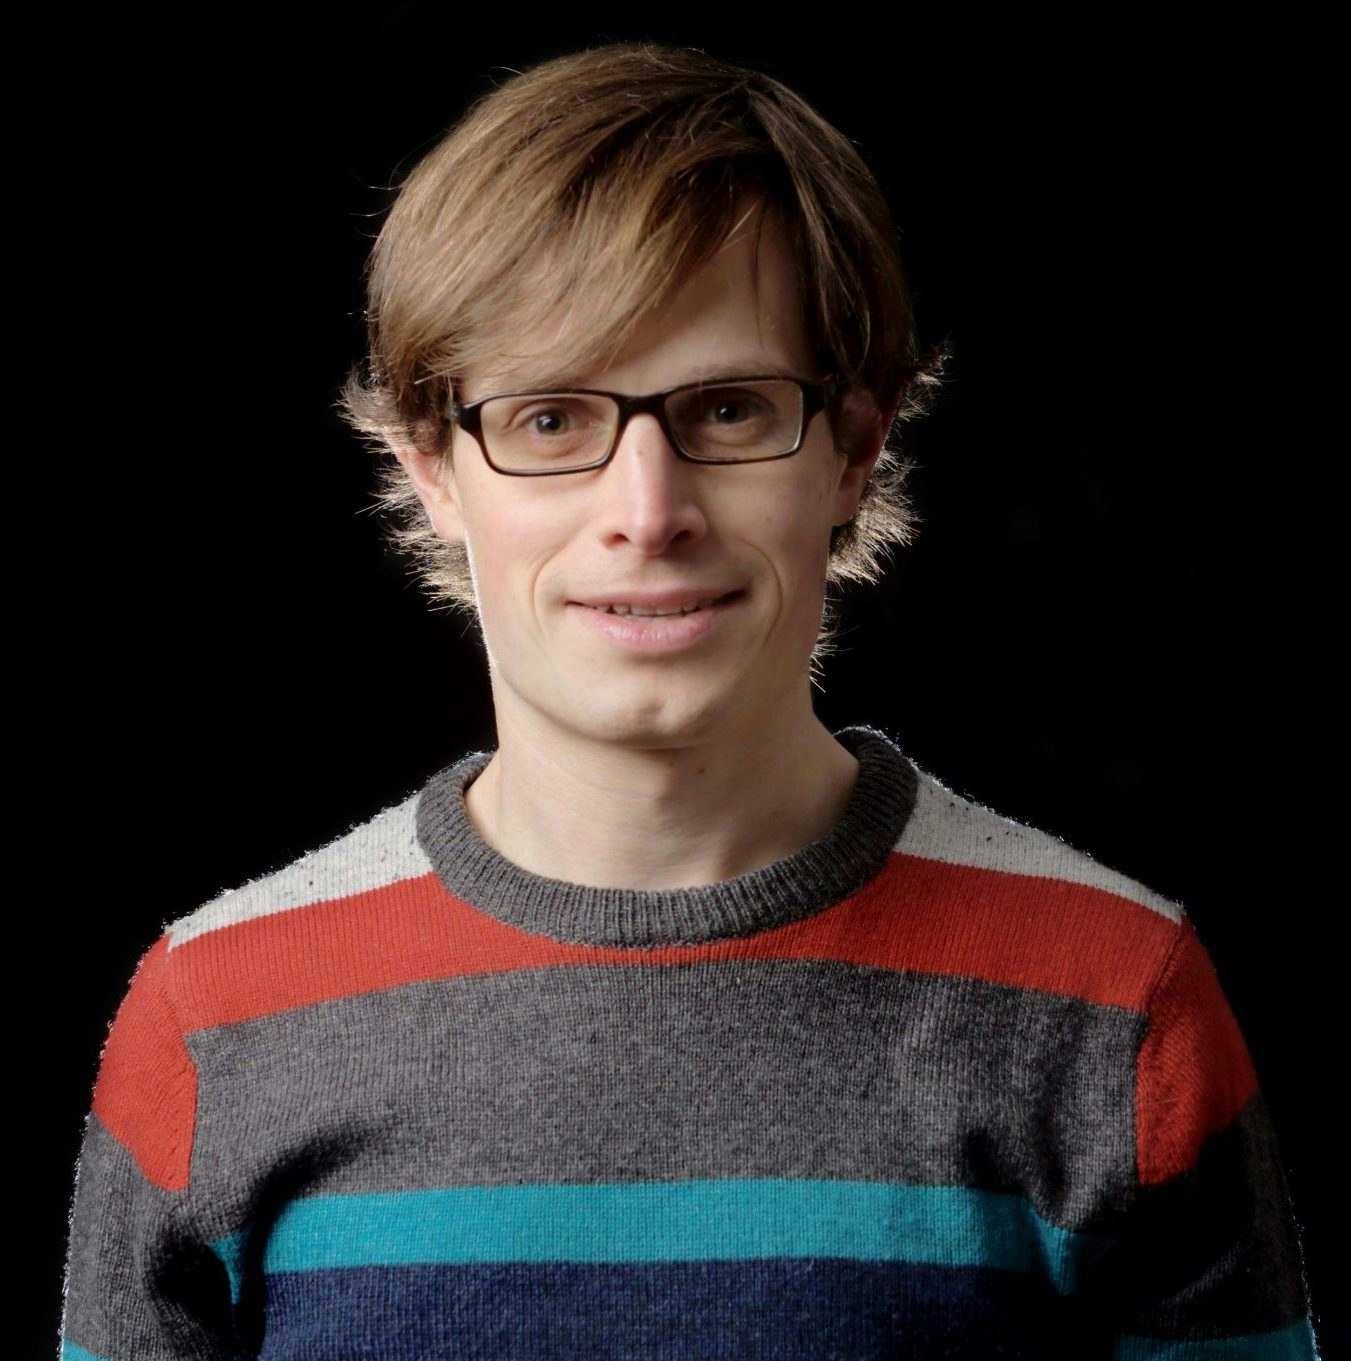 Image of Simon Mikkelsen who's uploaded more than 1,1m images to Mapillary.